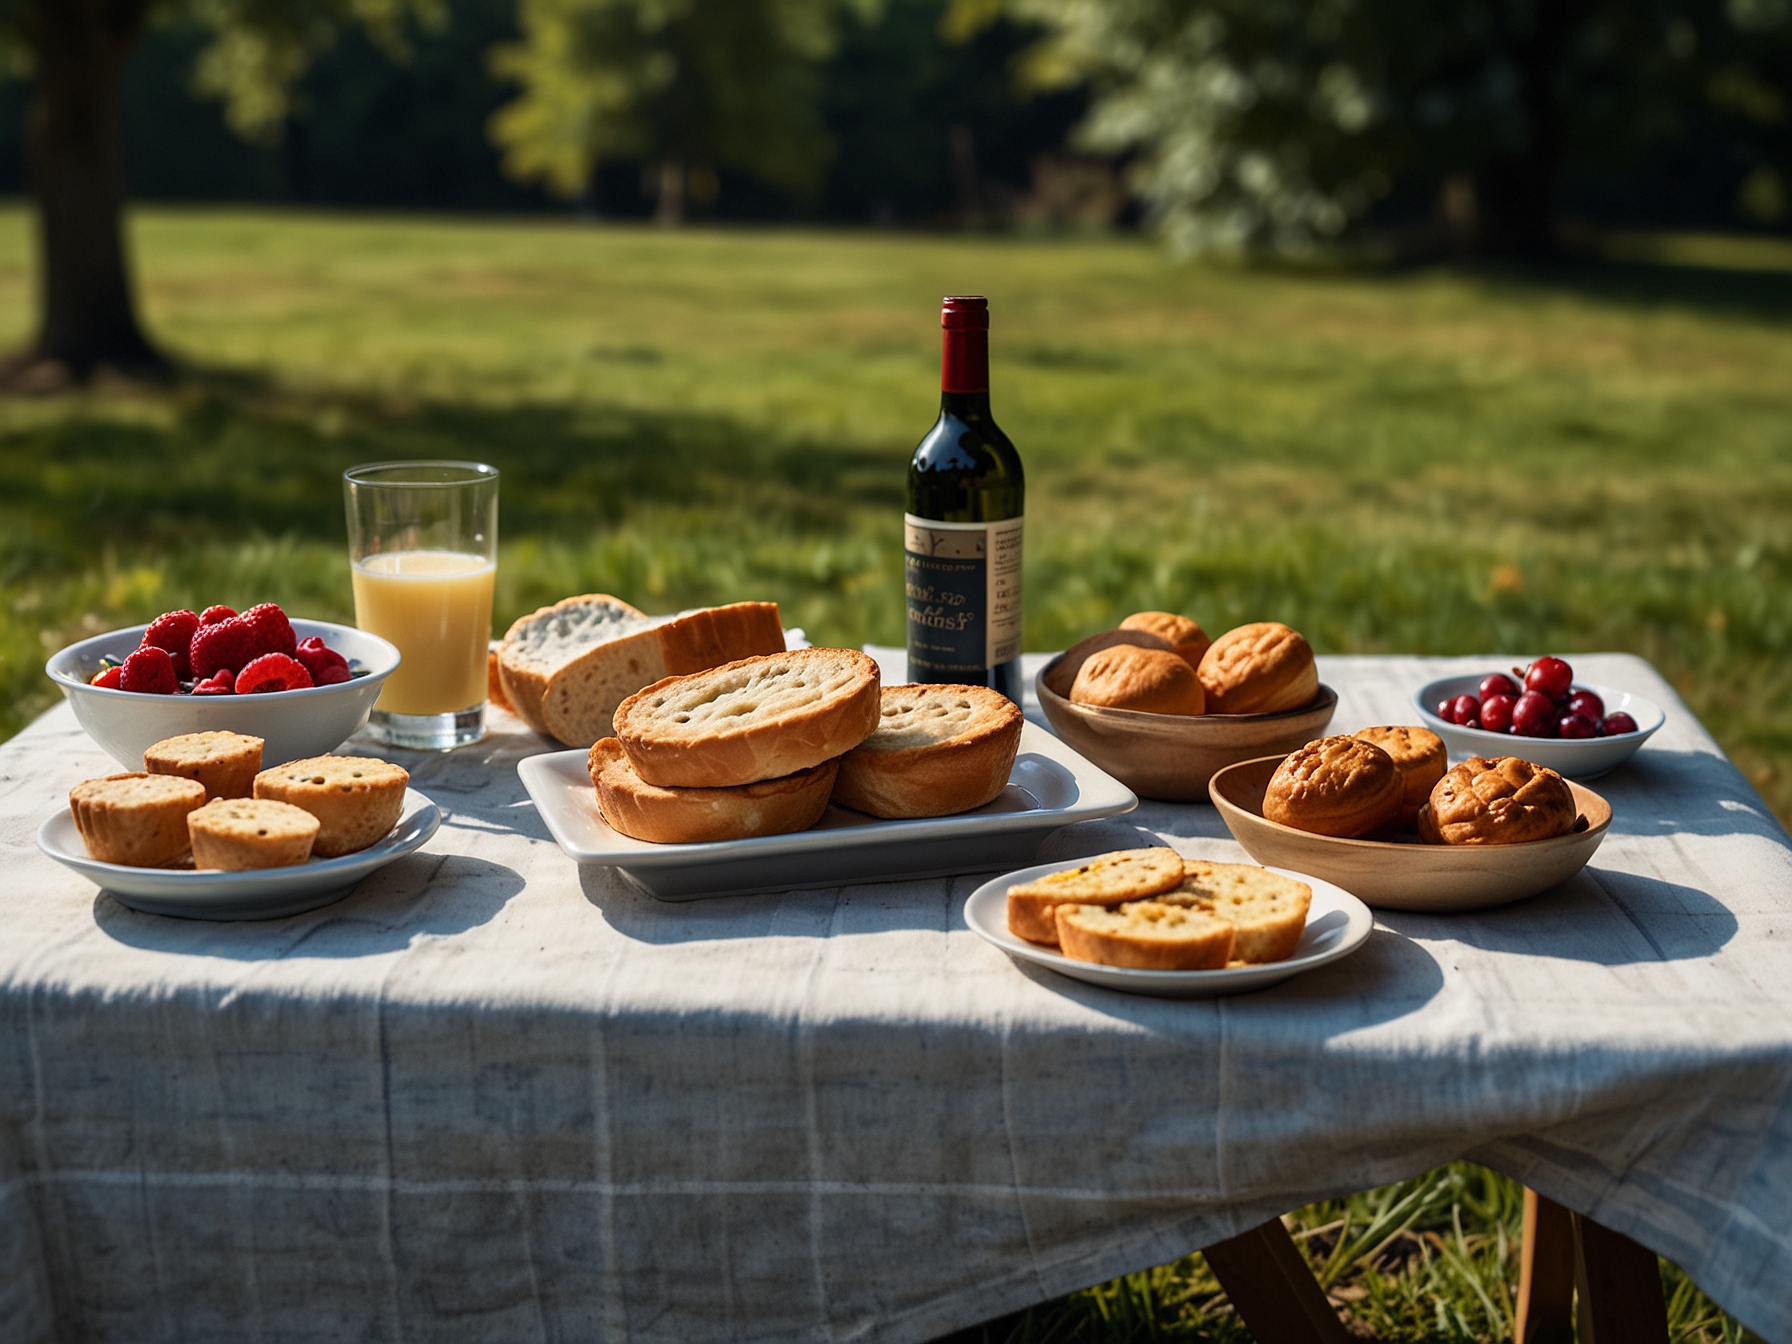 An outdoor picnic setup featuring the £2 pork pie as the centerpiece. Friends and family enjoy the savory treat, highlighting its portability and crowd-pleasing taste.